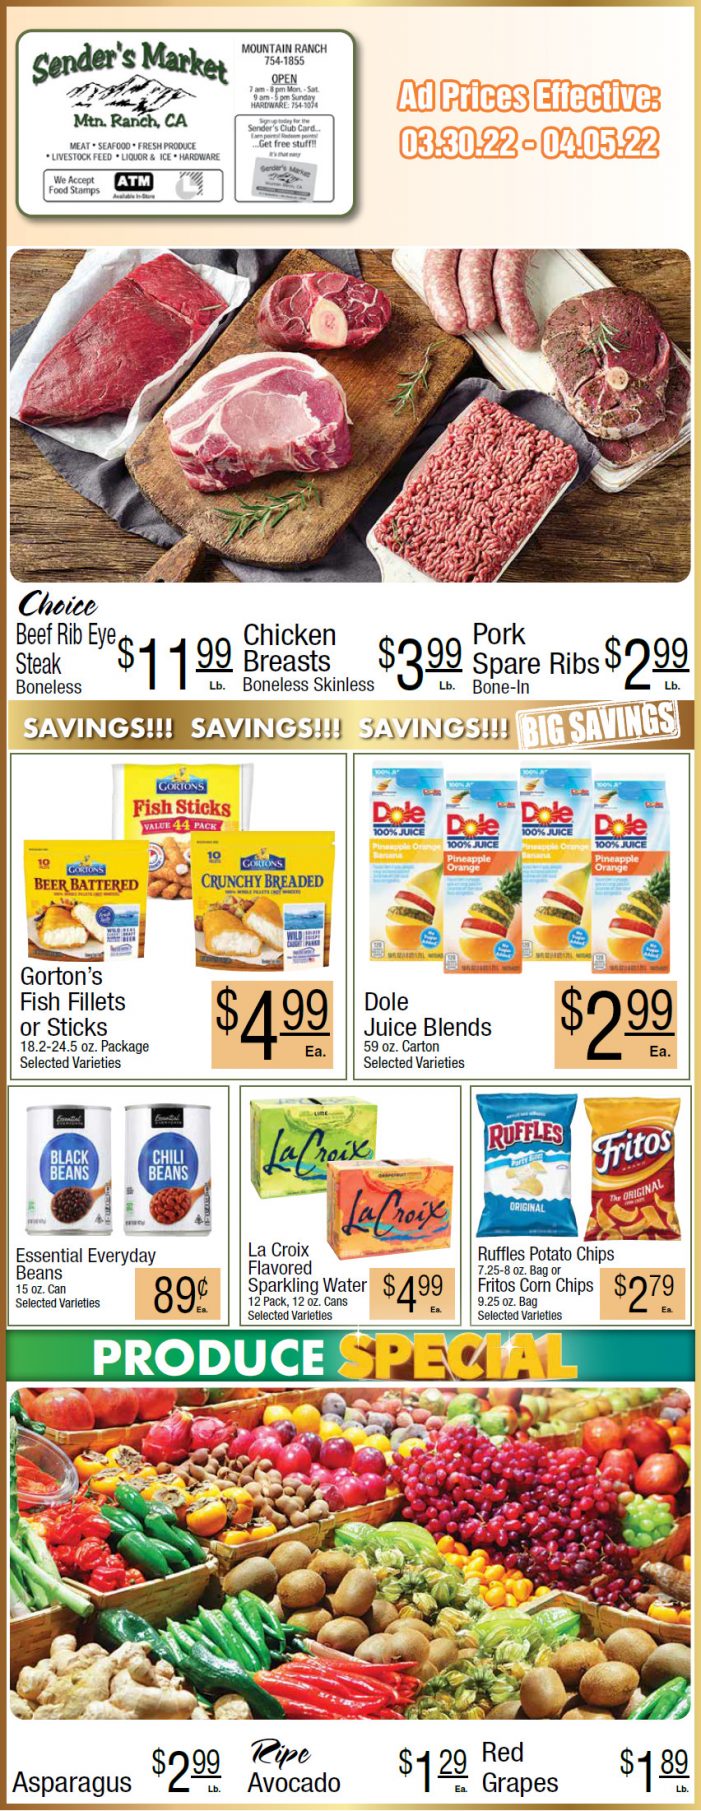 Sender’s Market’s Weekly Ad & Grocery Specials March 30th ~ April 5th! Shop Local & Save!